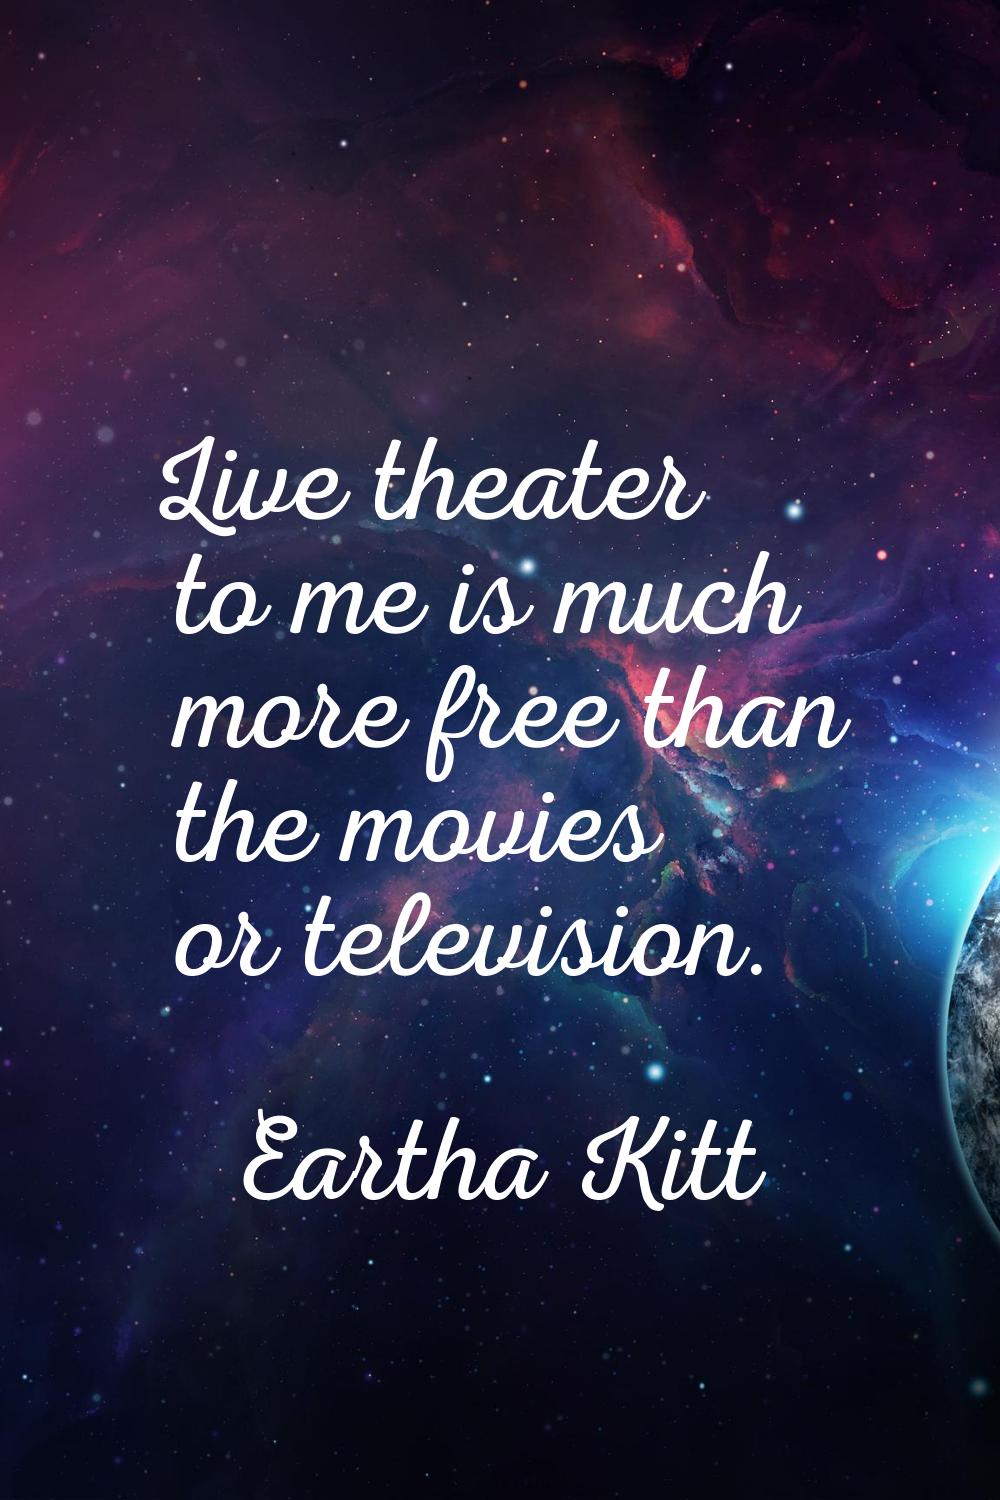 Live theater to me is much more free than the movies or television.